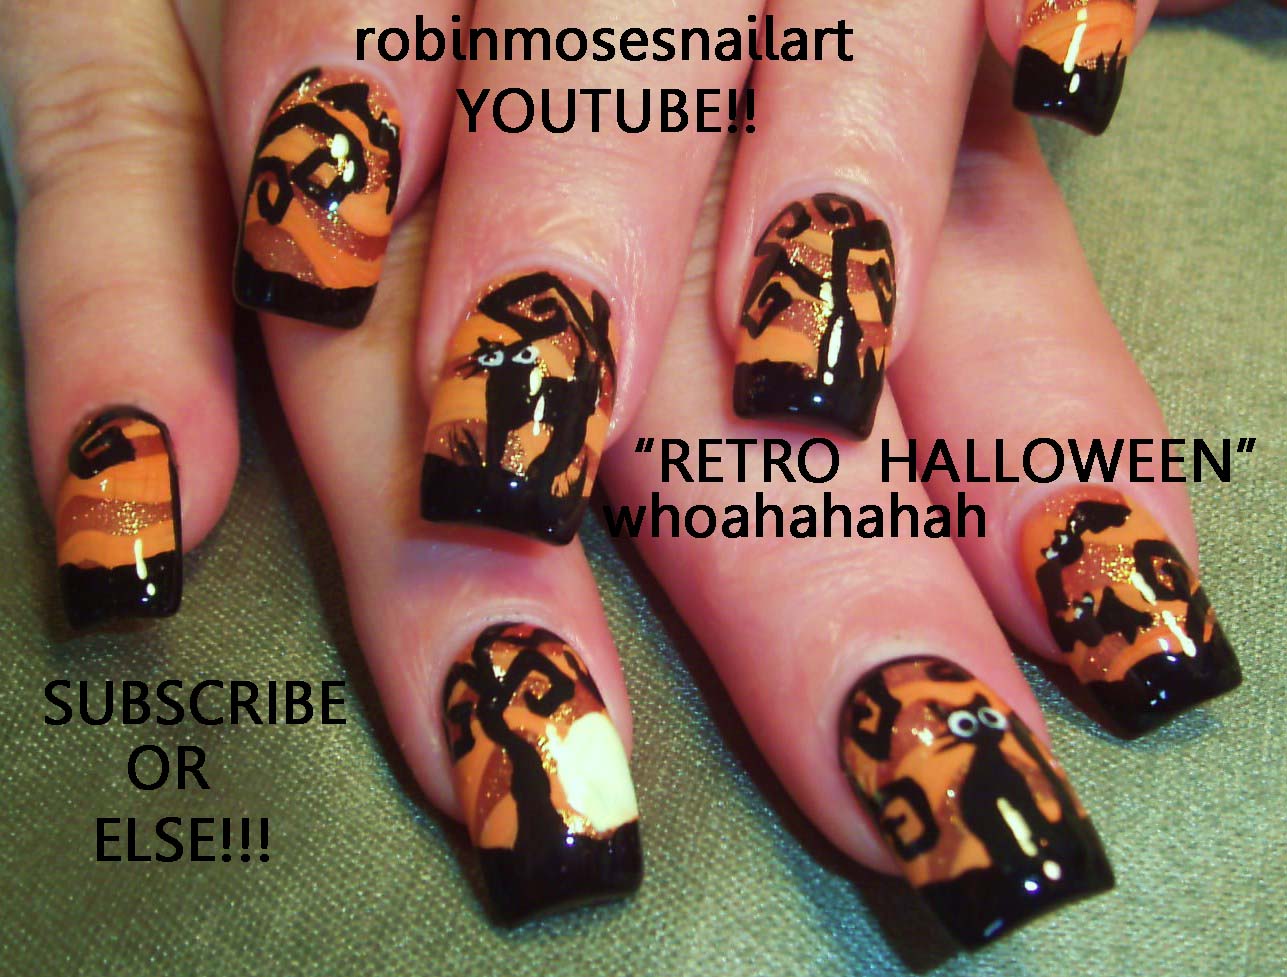 9. "Halloween Nail Art Inspiration from Top Design Magazines" - wide 8